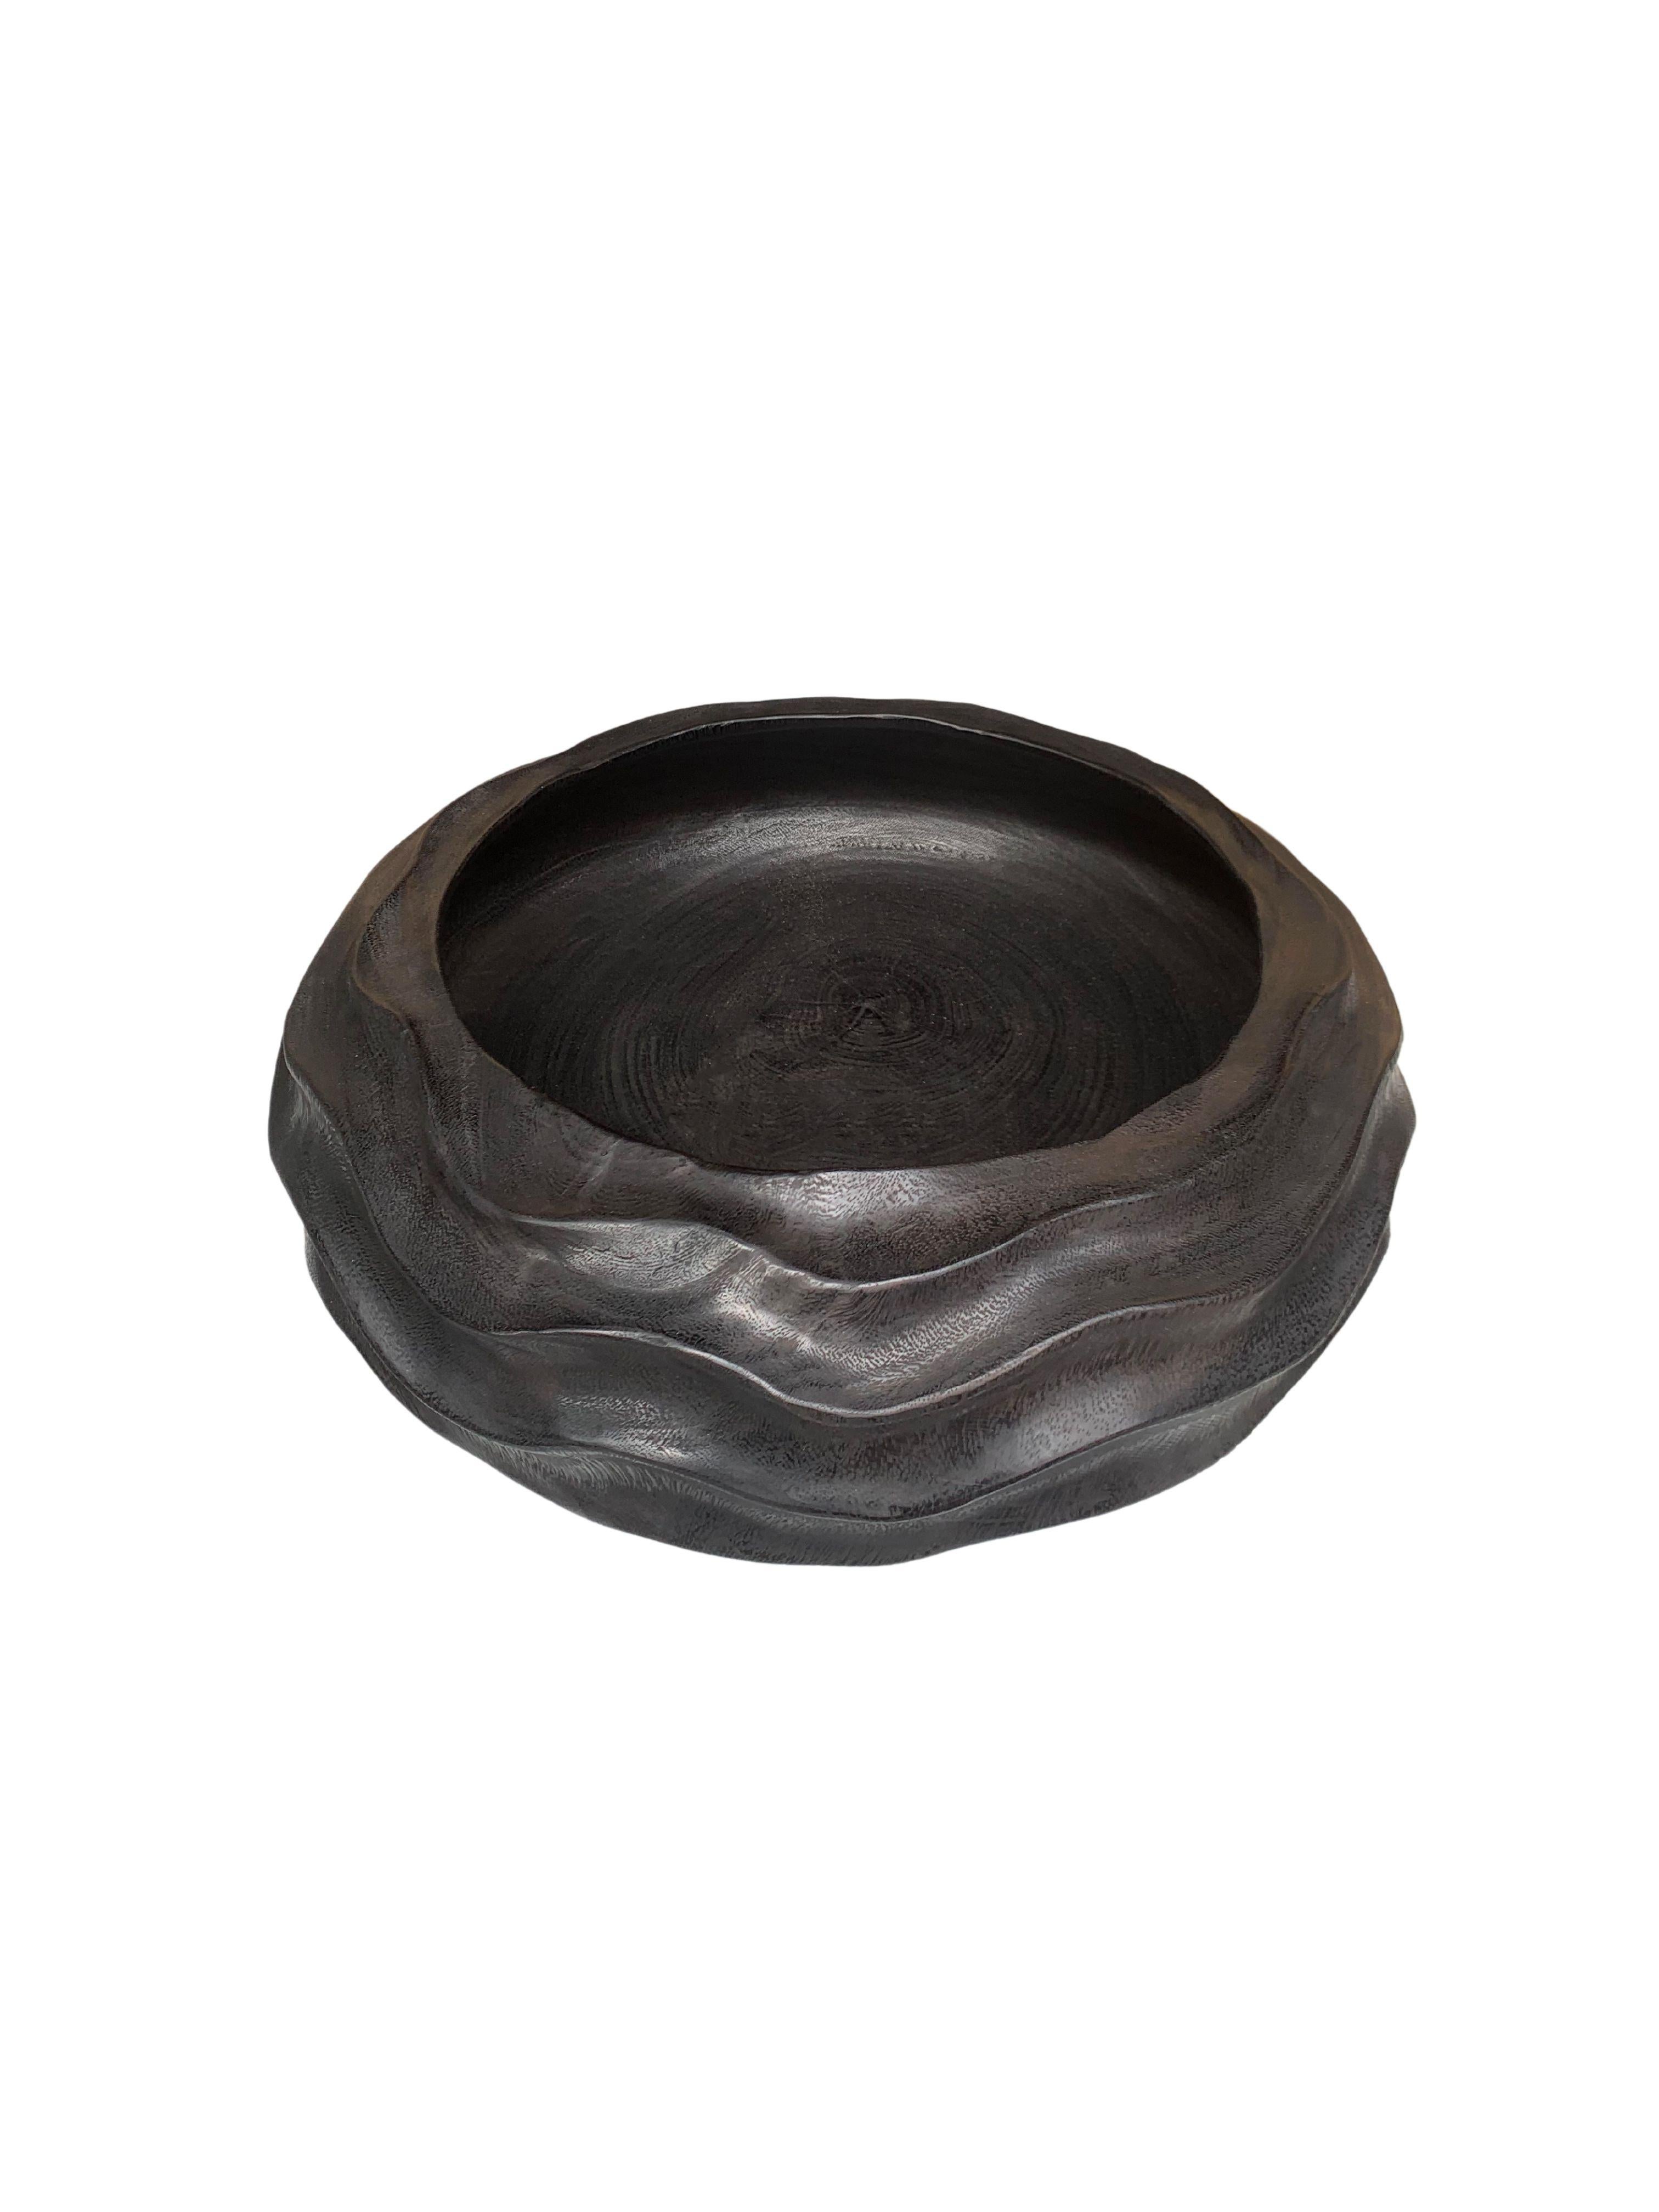 A hand-crafted mango wood bowl. The bowl was cut from a much larger slab of mango wood and features a curved and ribbed texture on its sides. To achieve its rich black colour the bowl was burnt three times and finished with a clear coat. A